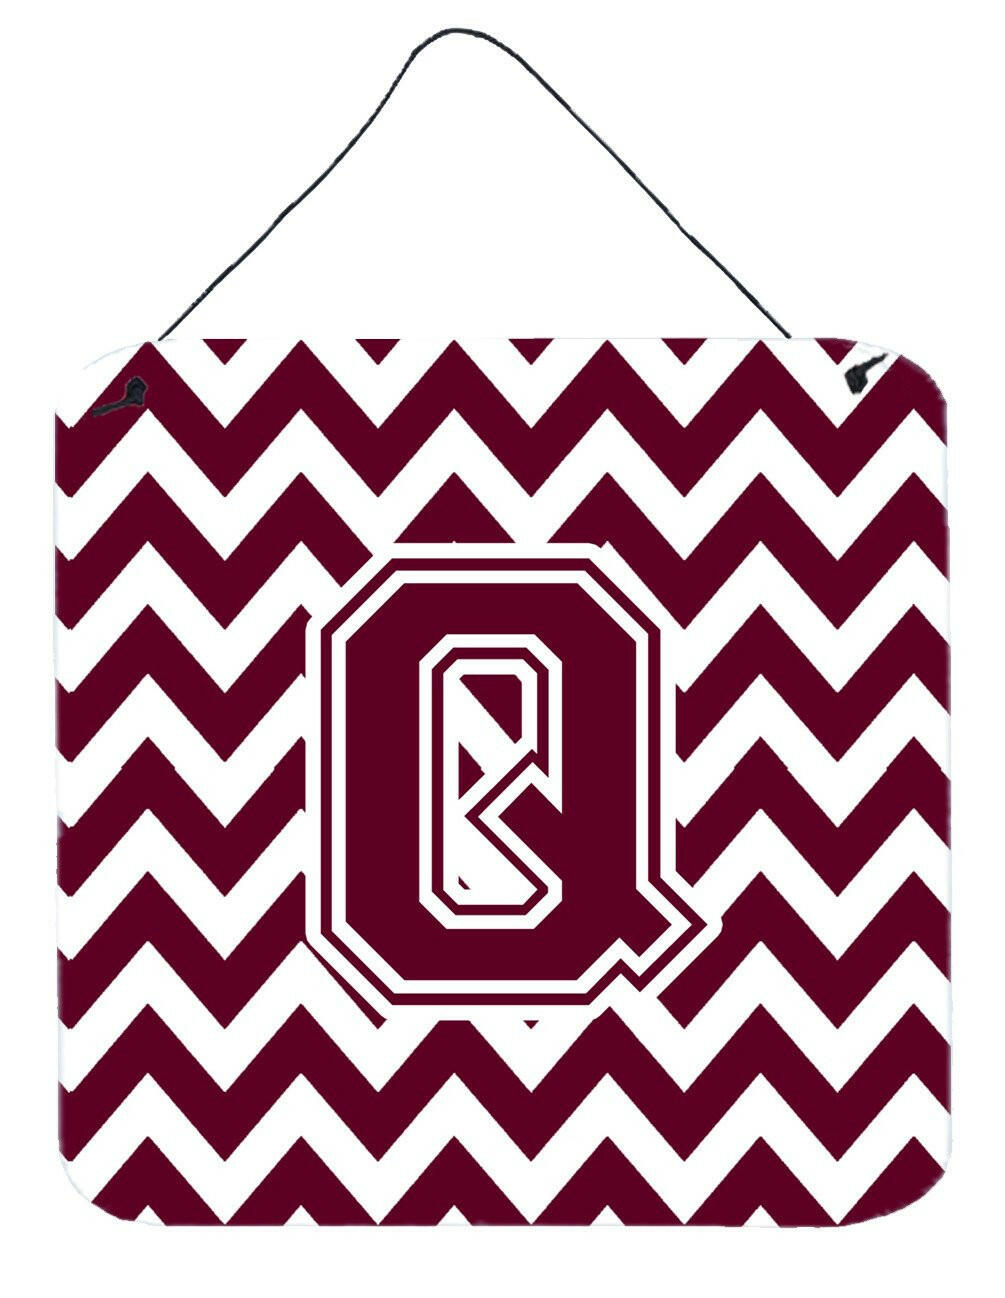 Letter Q Chevron Maroon and White  Wall or Door Hanging Prints CJ1051-QDS66 by Caroline's Treasures